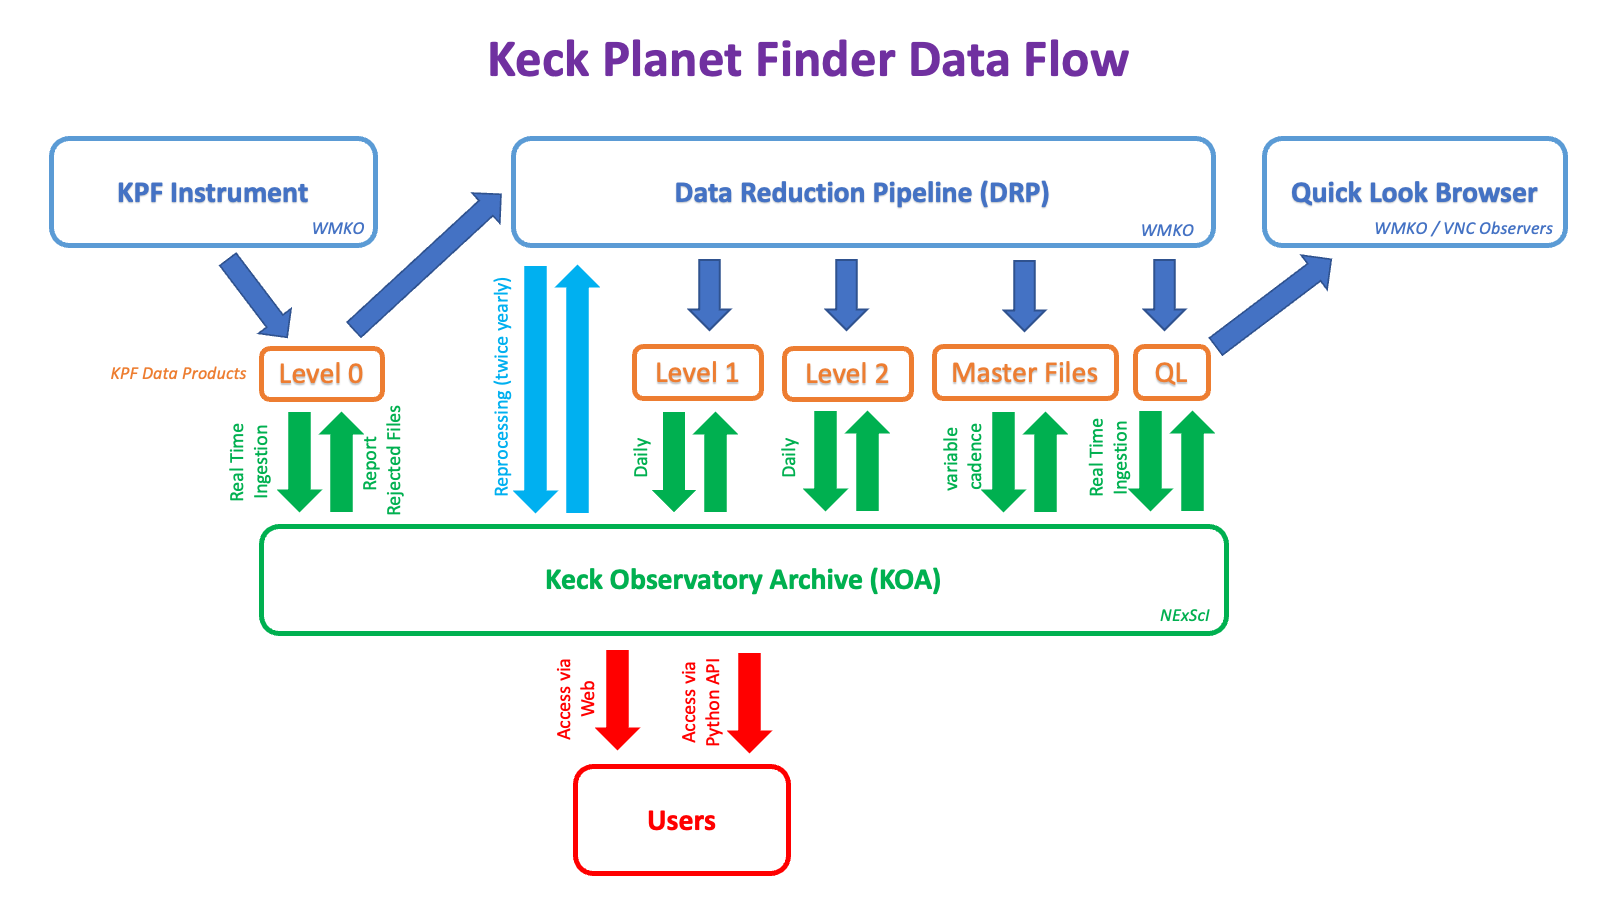 An idealized vision for the KPF data flow.